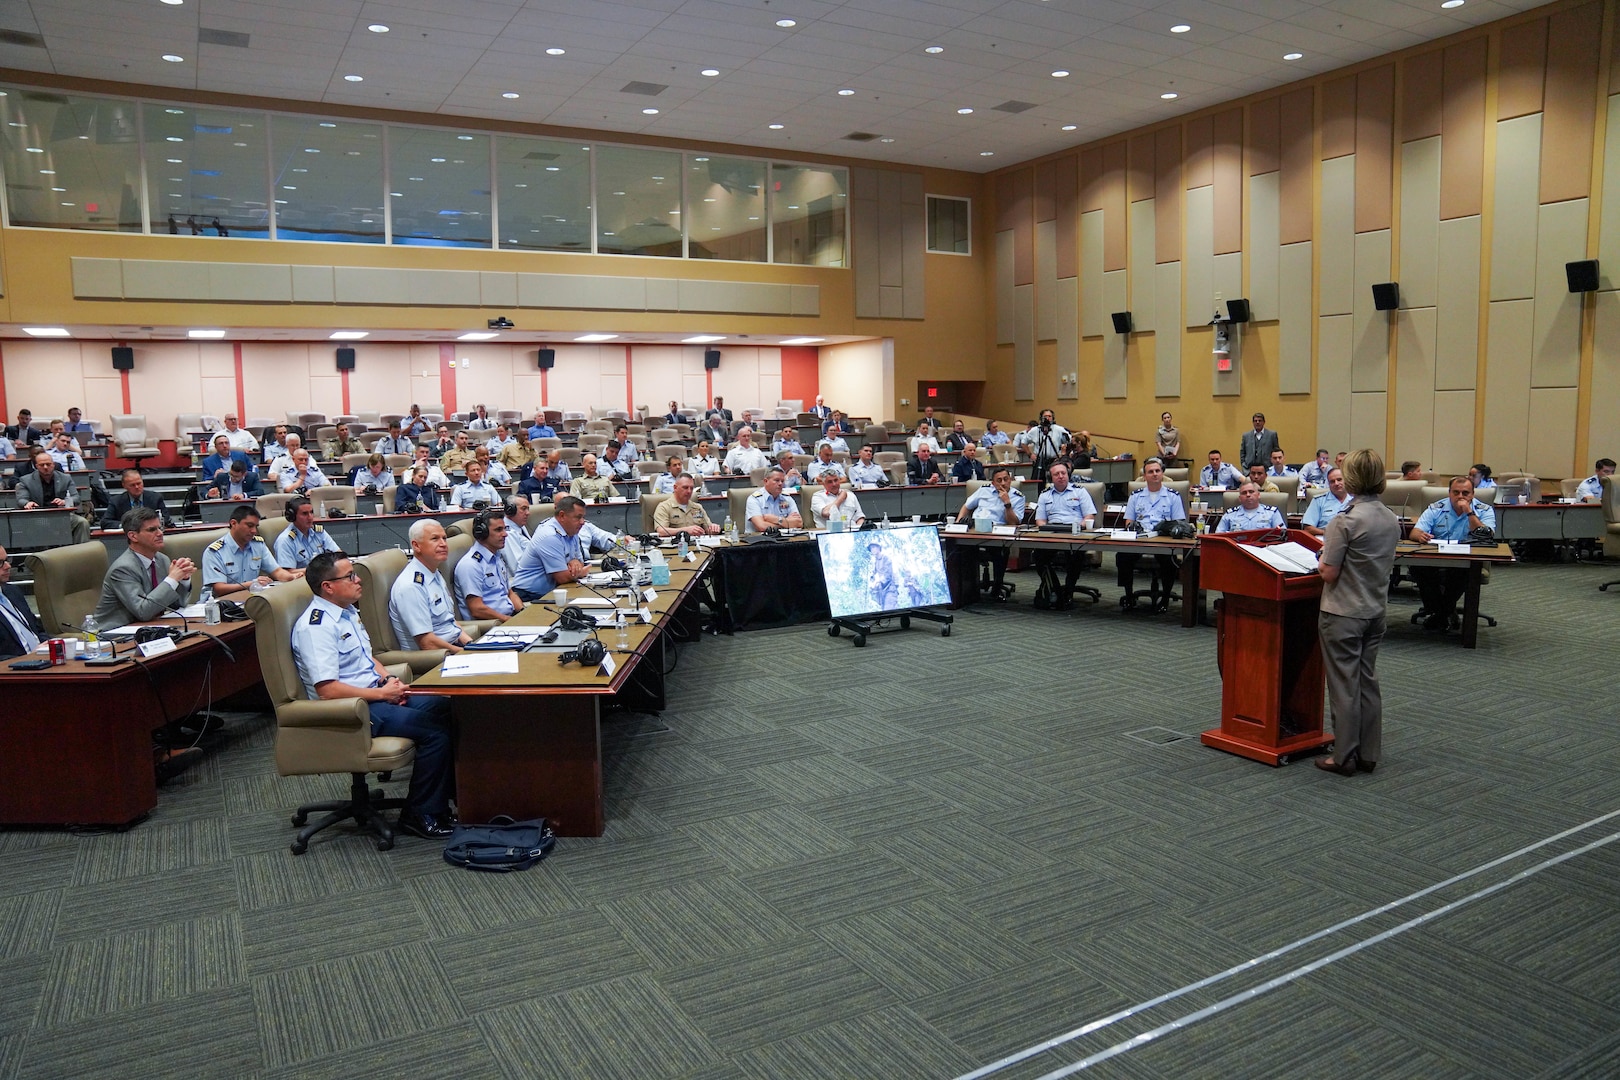 A military conference is held in a large room.